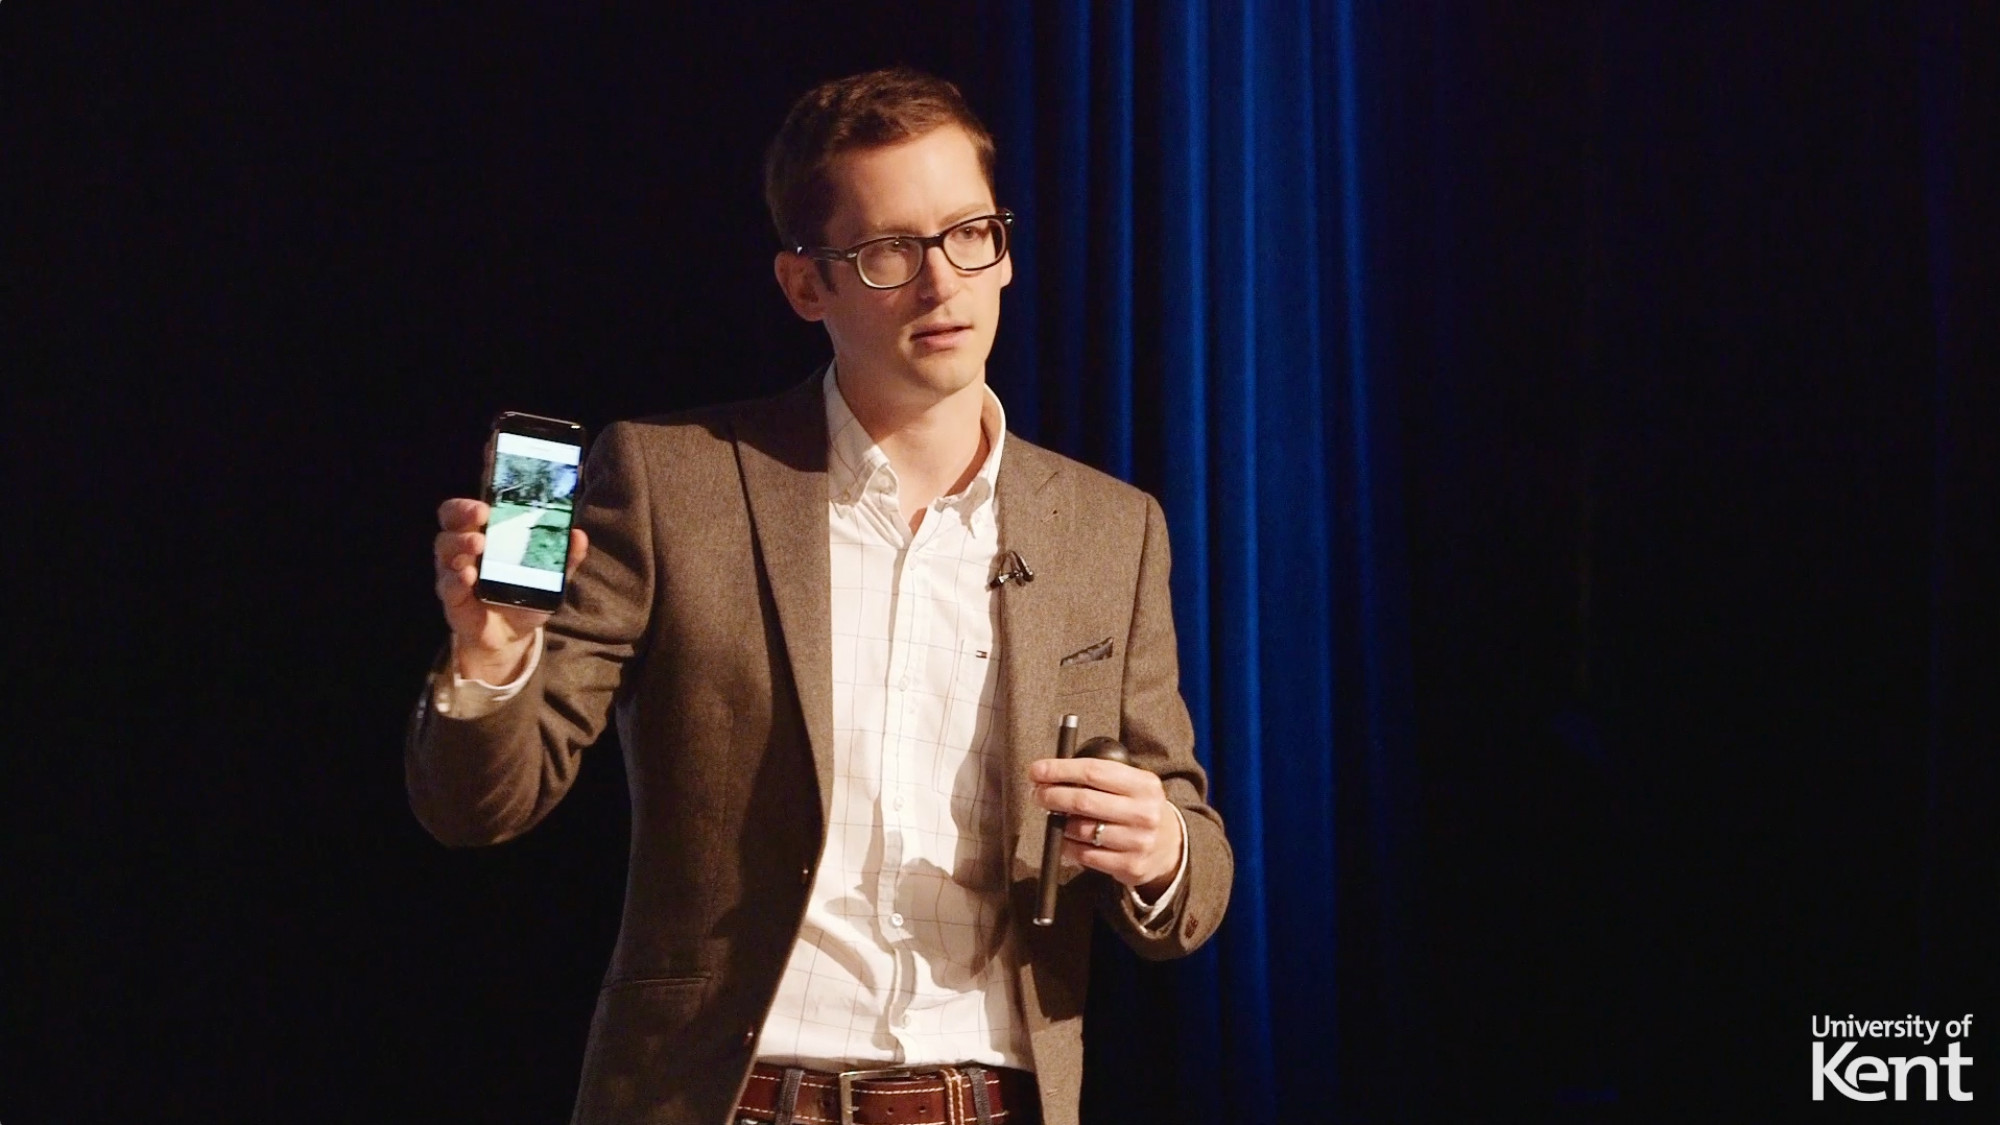 Academic holding up a smartphone to audience in a lecture